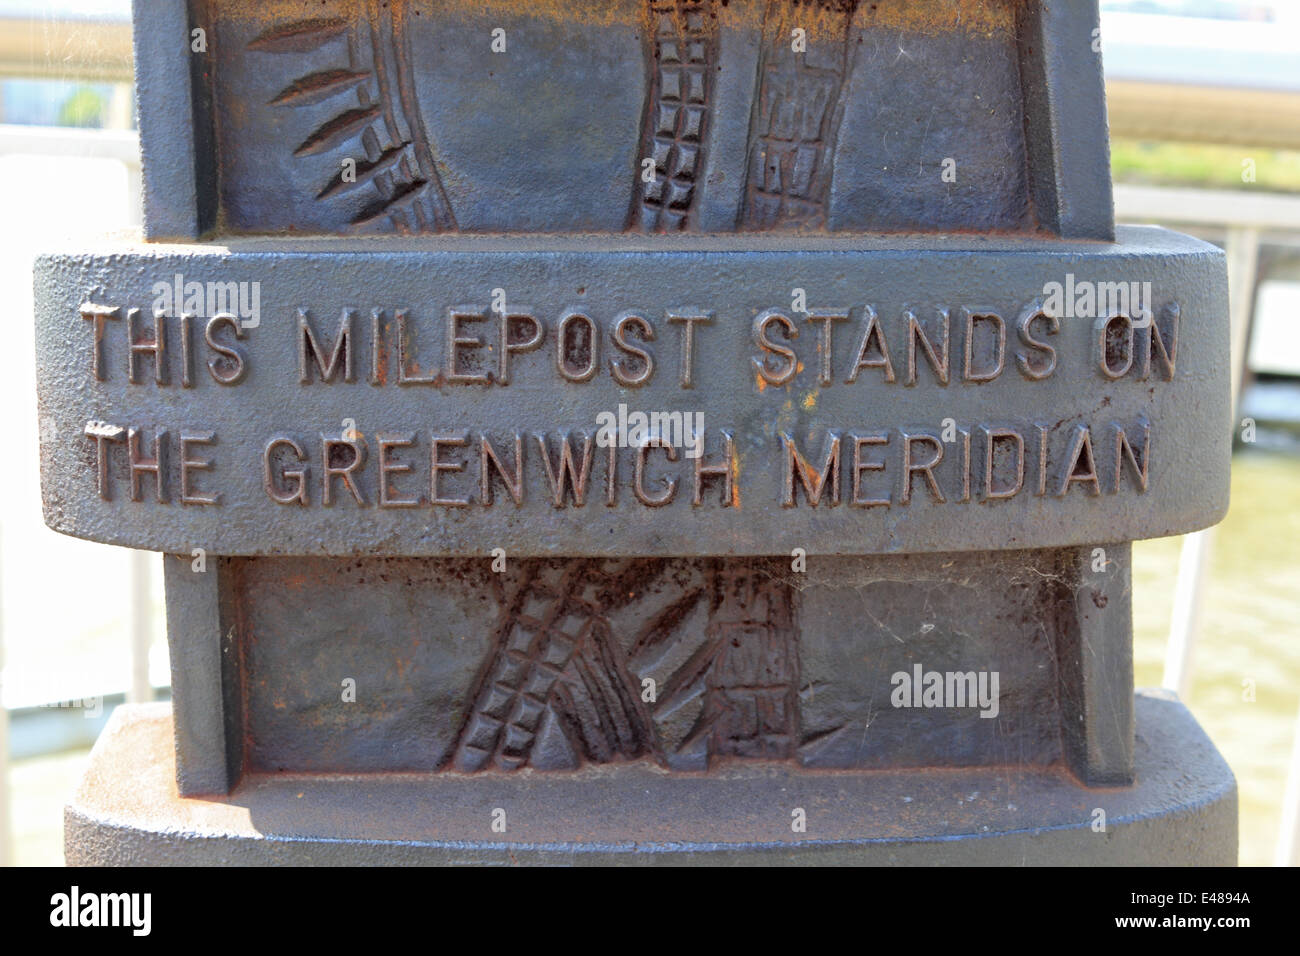 Milepost standing on the Greenwich Meridian on the Greenwich Peninsula, London, England, UK. Stock Photo